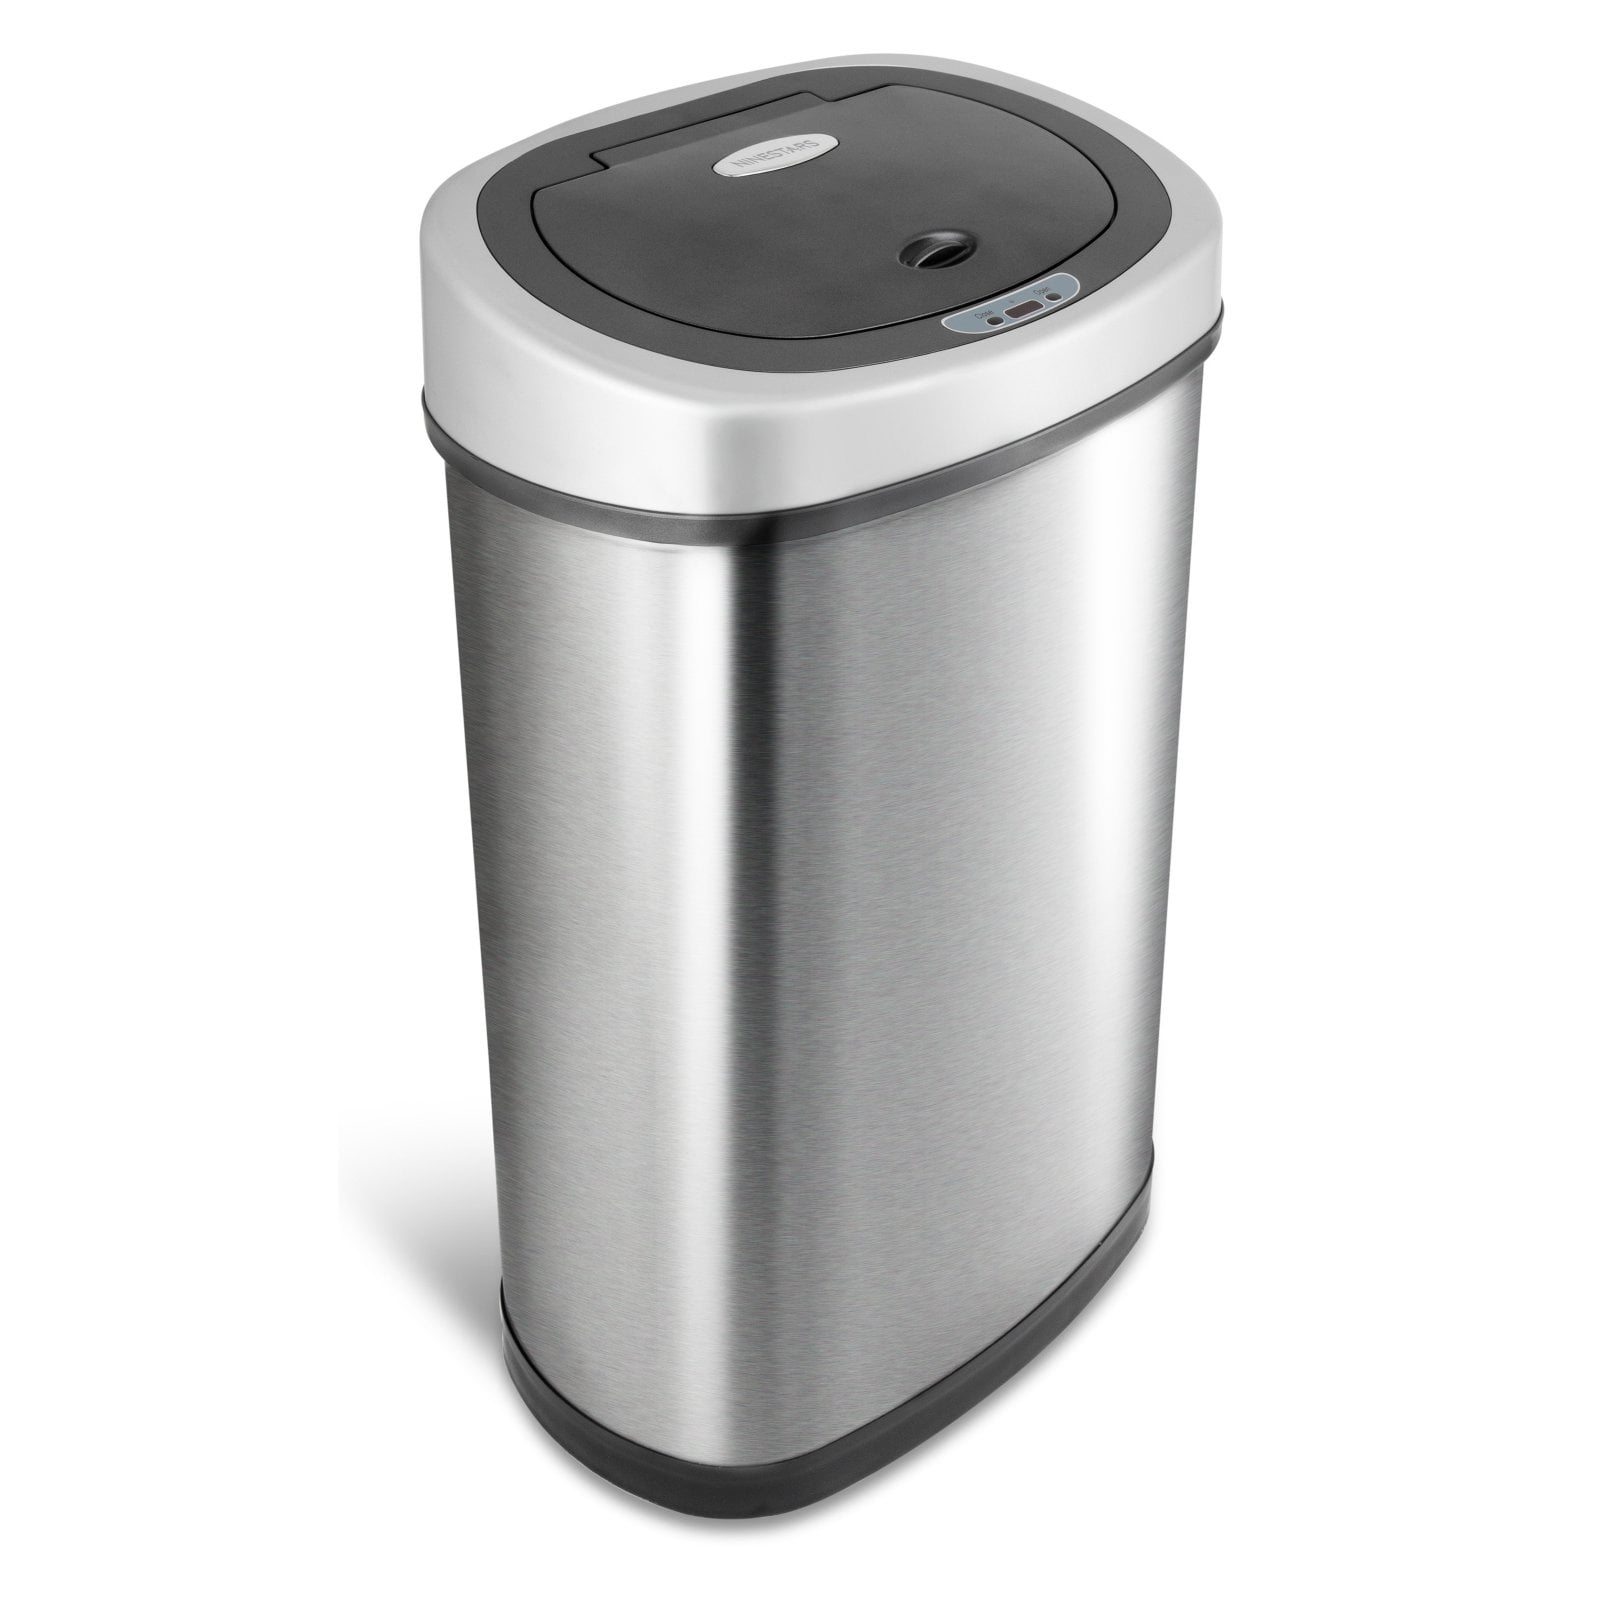 Nine Stars DZT-50-9 Touchless Stainless Steel, 13.2 Gallon, Trash Can